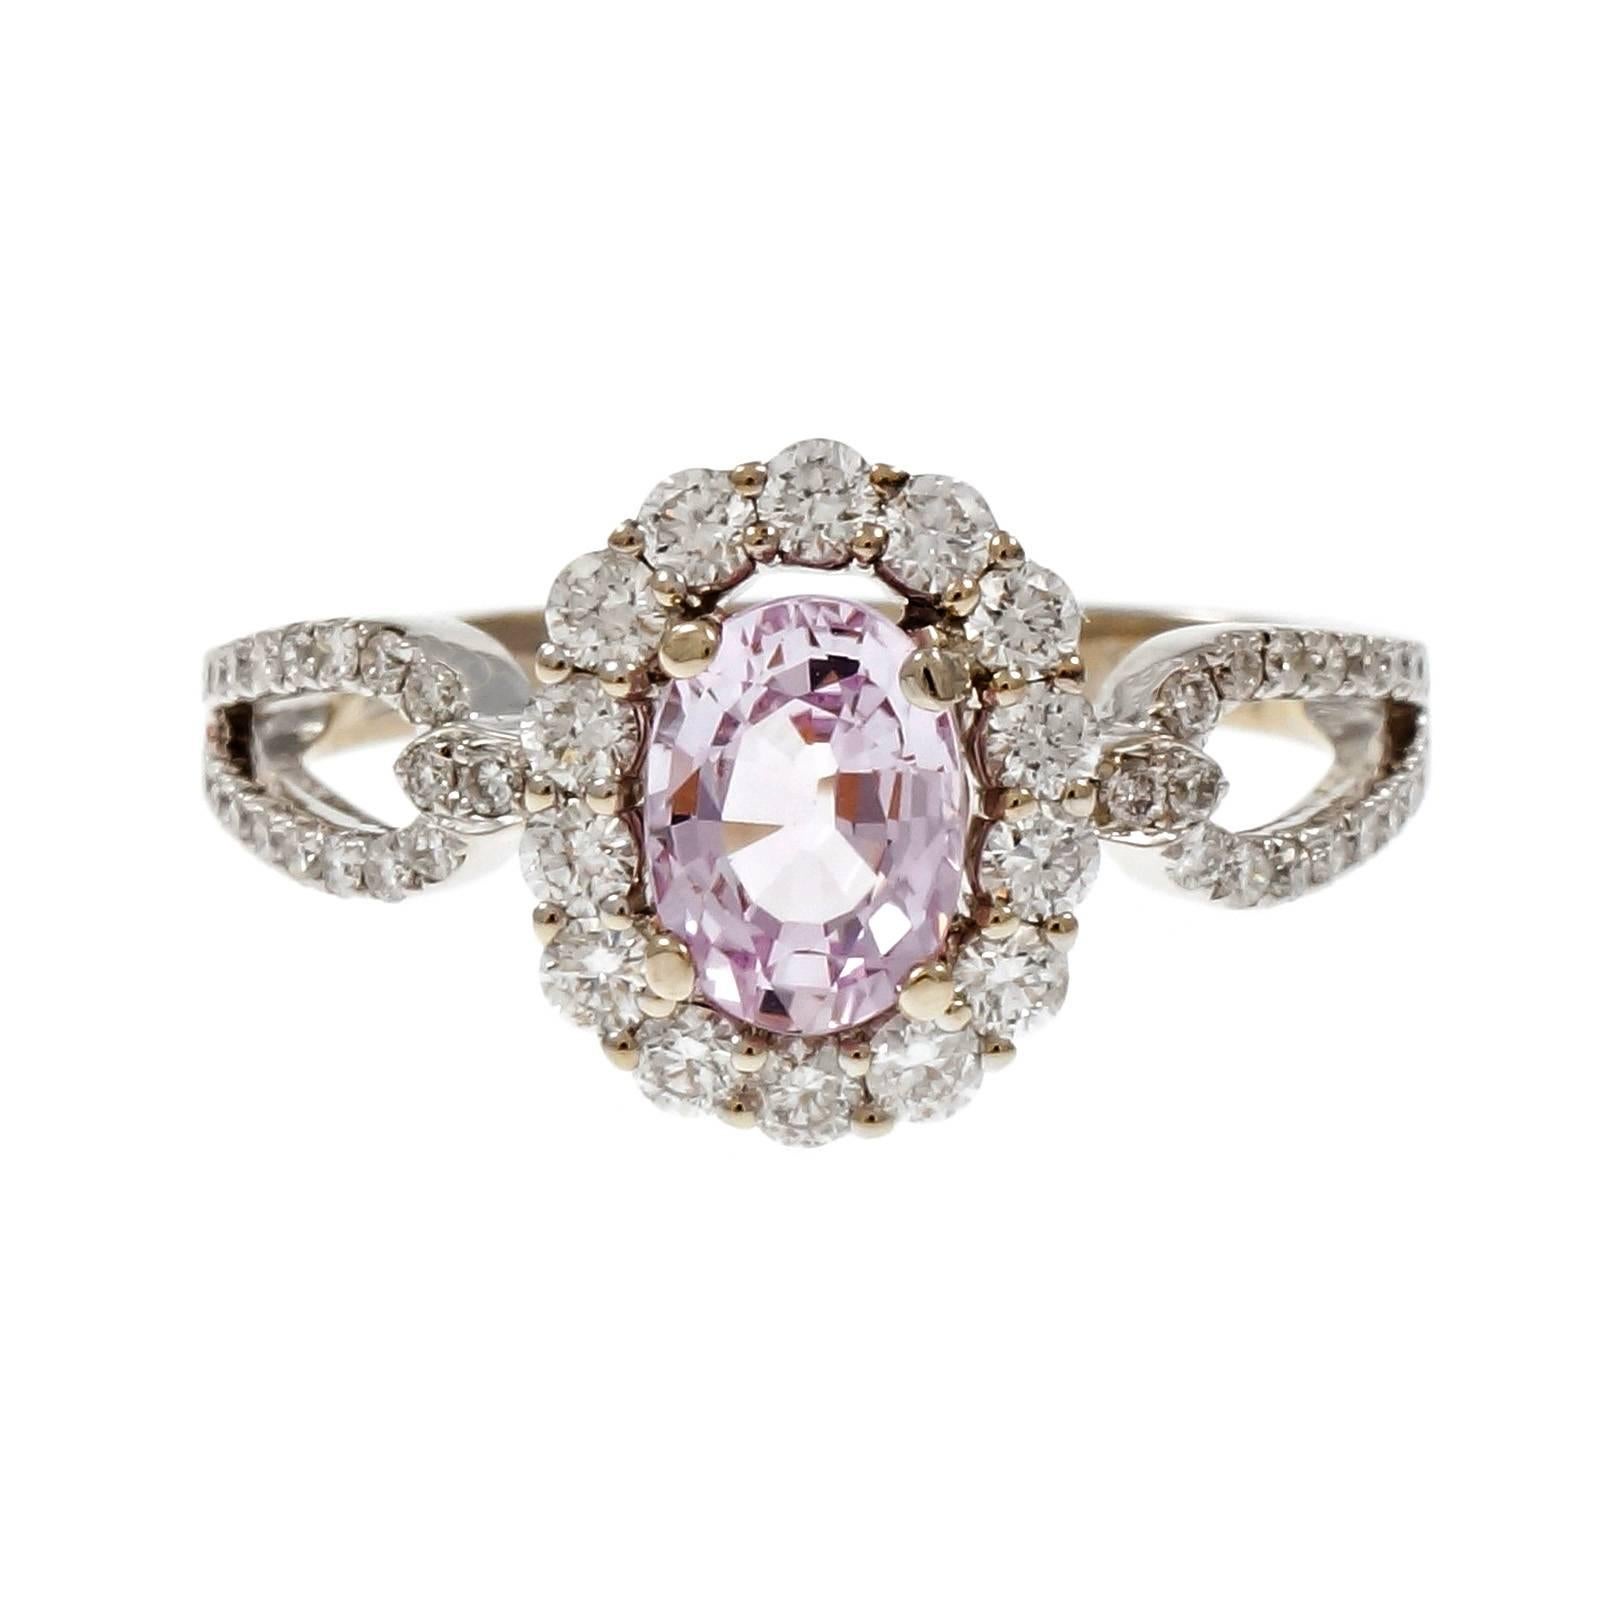 Pin oval sapphire and diamond halo engagement ring. Natural no heat GIA certified soft light pink Sapphire in an 18k white gold split shank setting with accent diamonds.

1 oval light pink Sapphire, approx. total weight 1.13cts, no heat, GIA